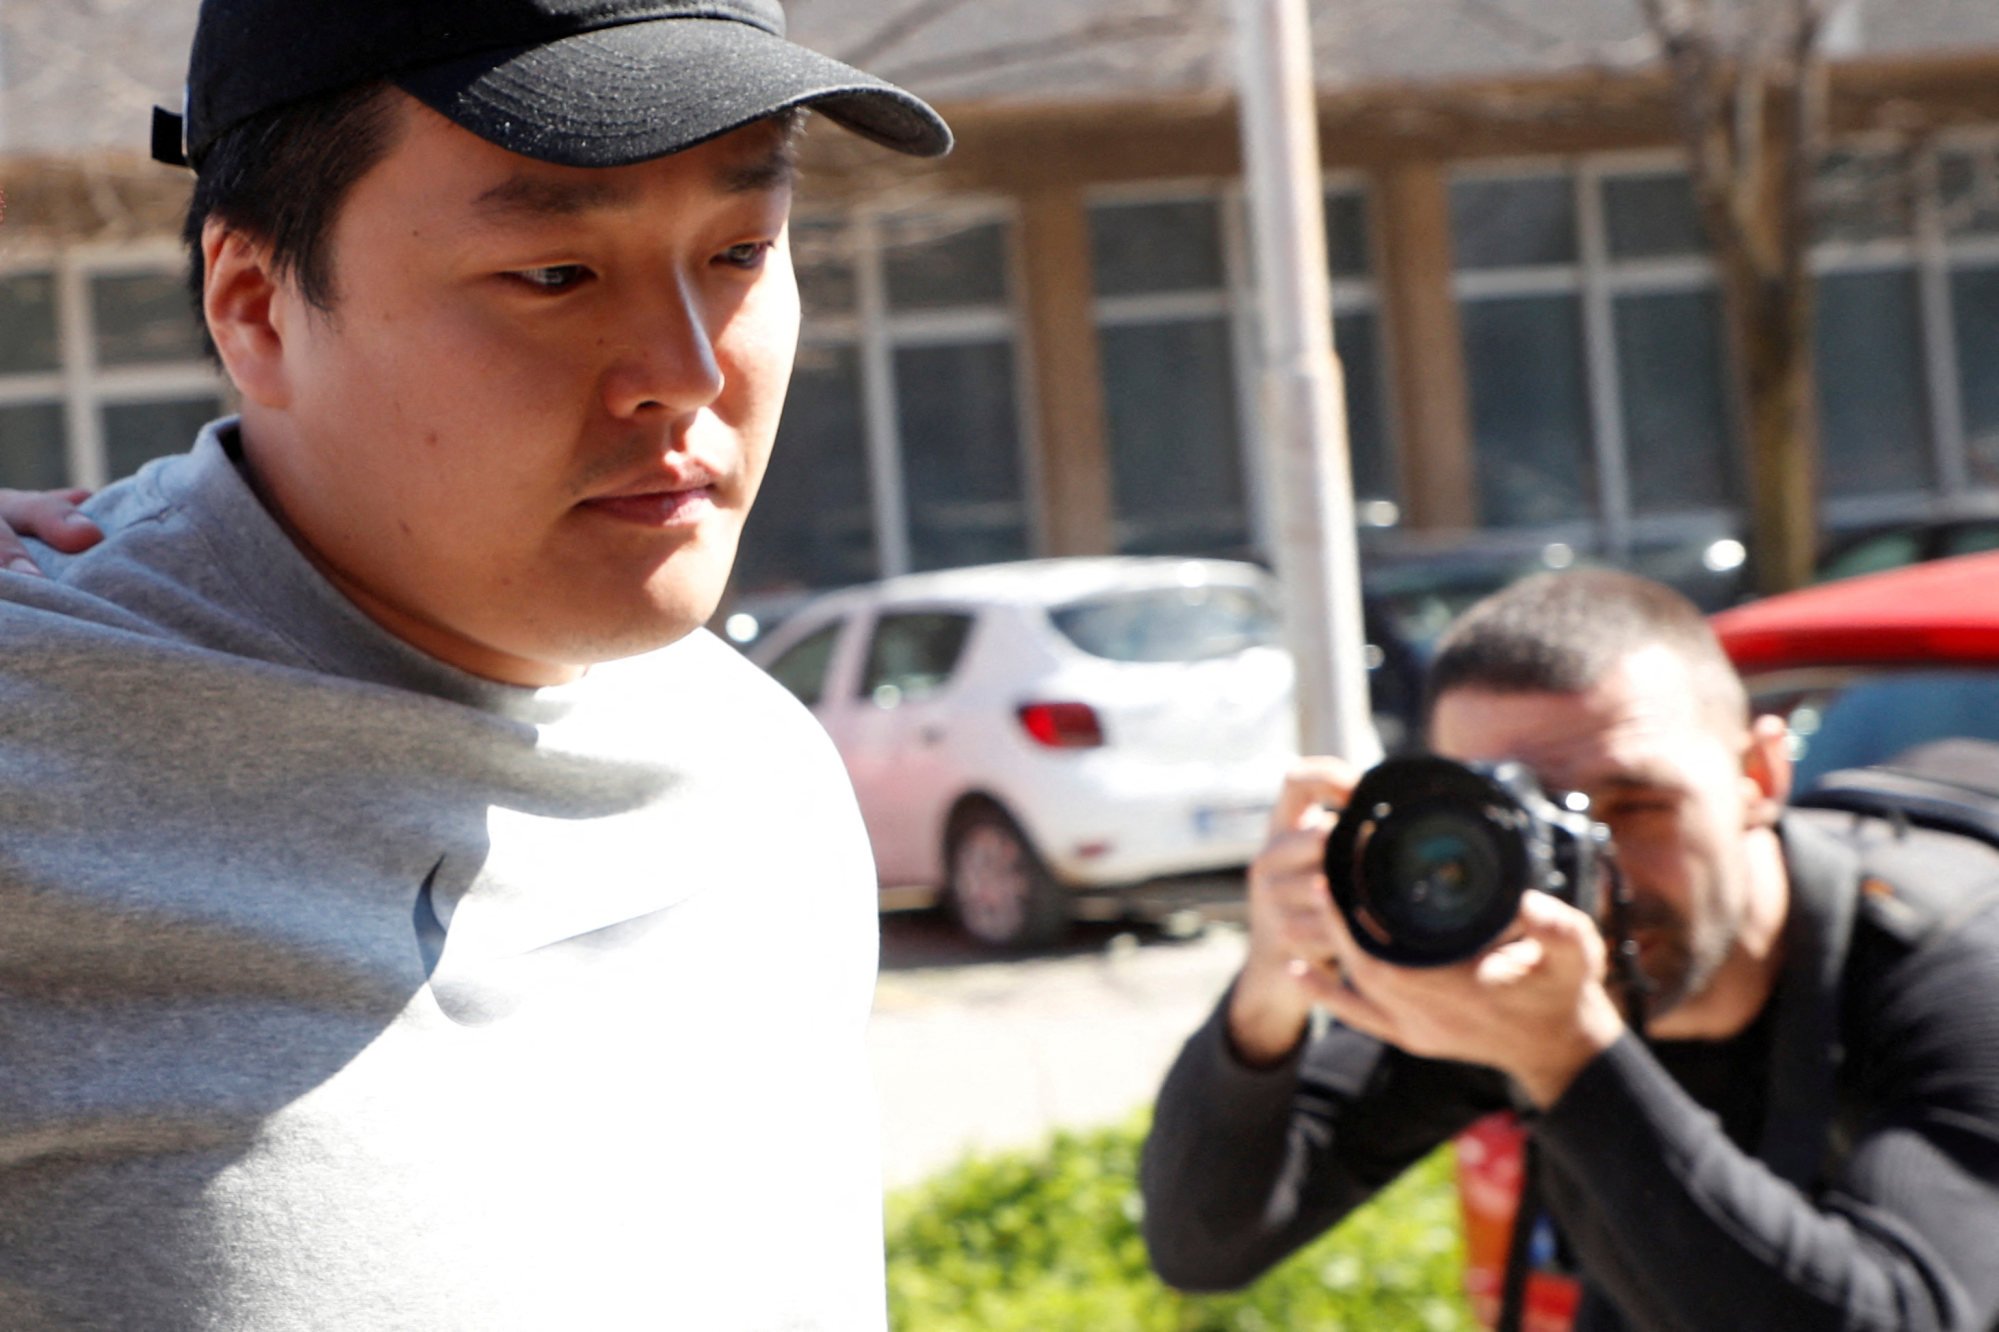 Do Kwon, the cryptocurrency entrepreneur who created the failed Terra stablecoin, is taken to court in handcuffs in Montenegro in March. Photo: Reuters